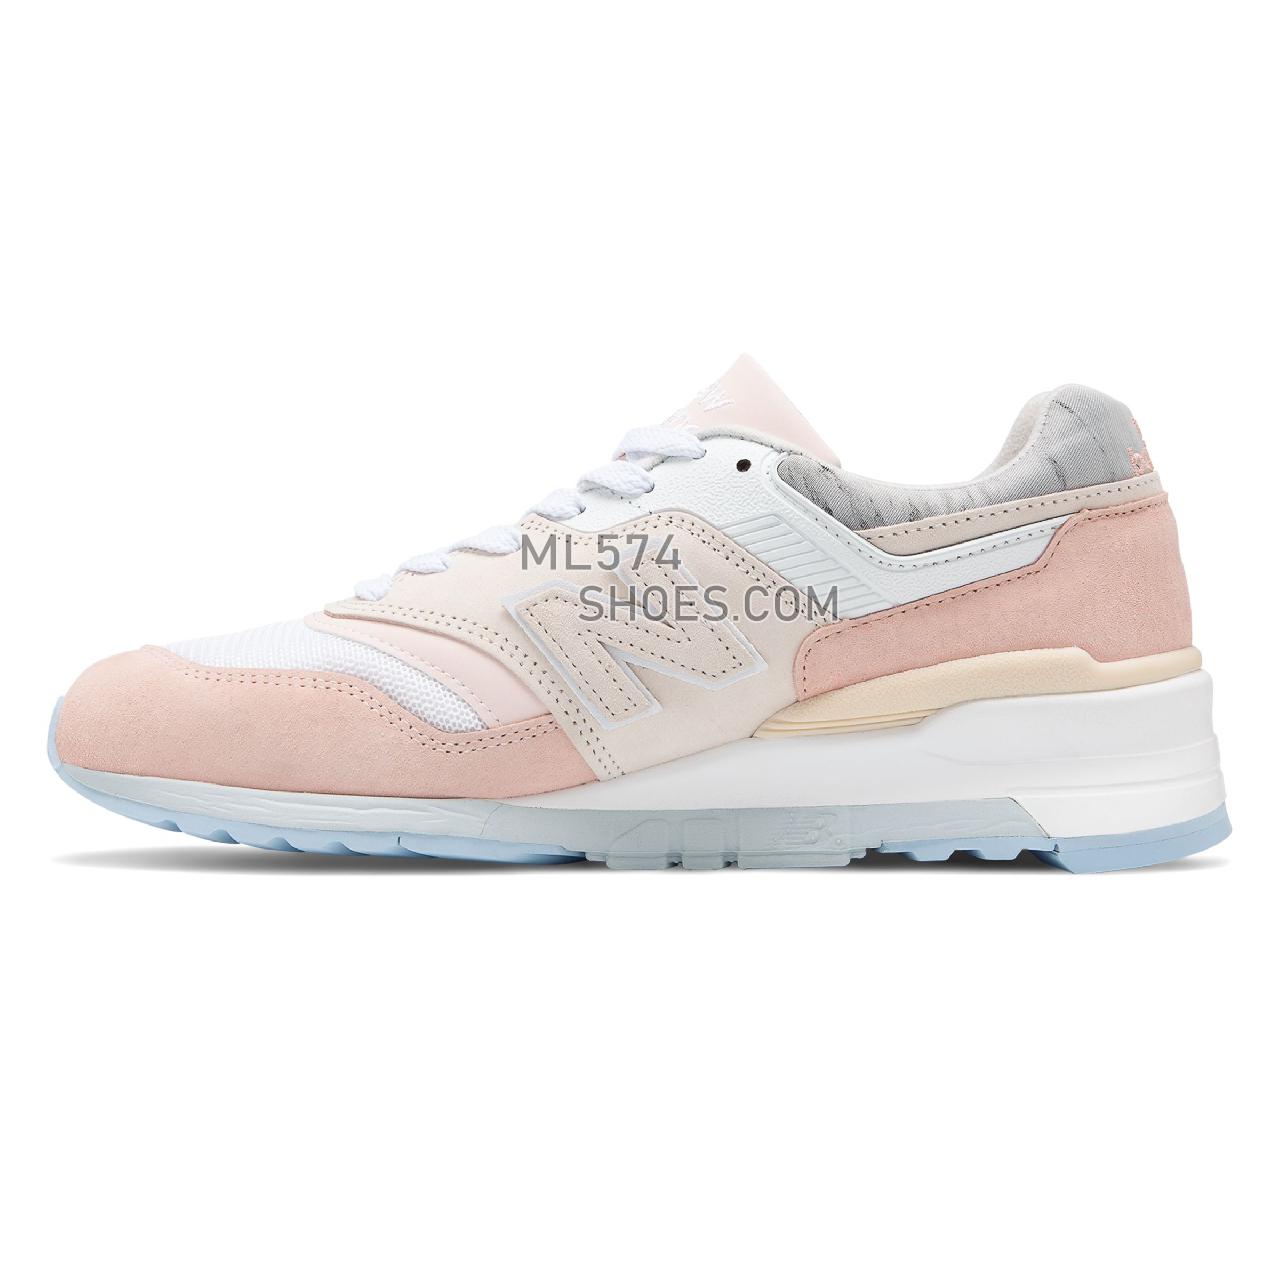 New Balance Made in US 997 - Men's Made in US 997 - White with Pink - M997LBH